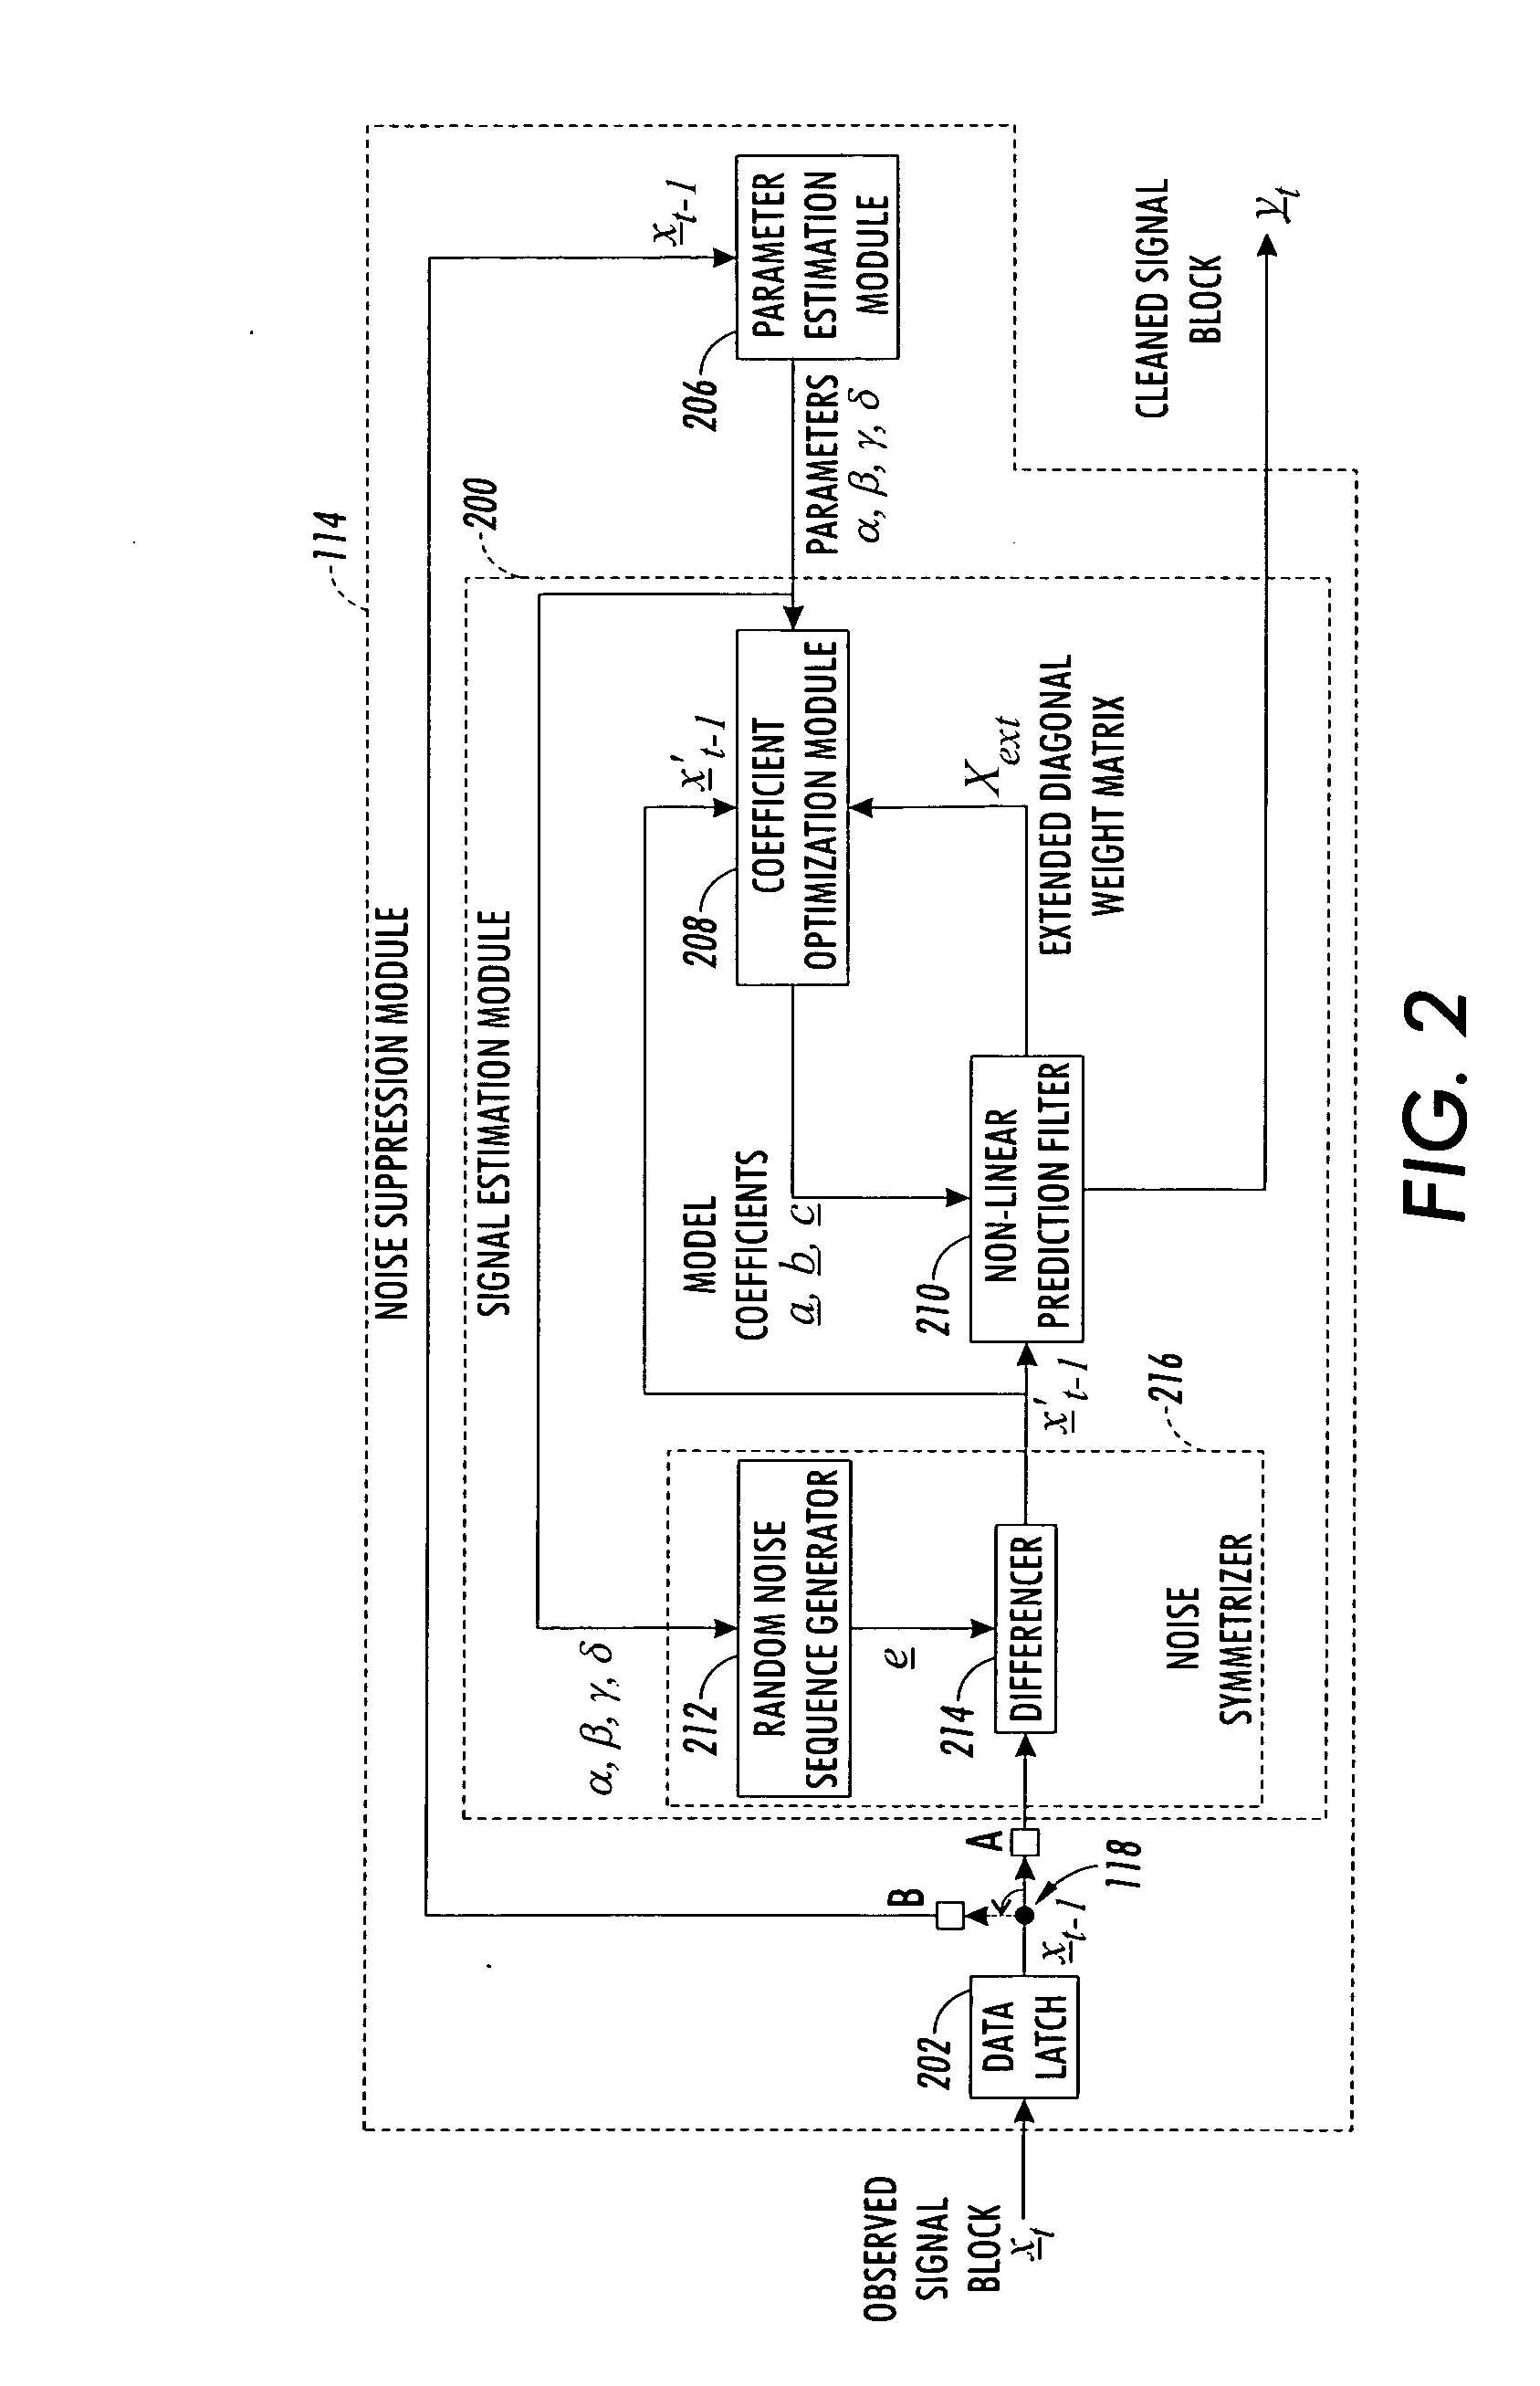 Method and apparatus for reducing impulse noise in a signal processing system